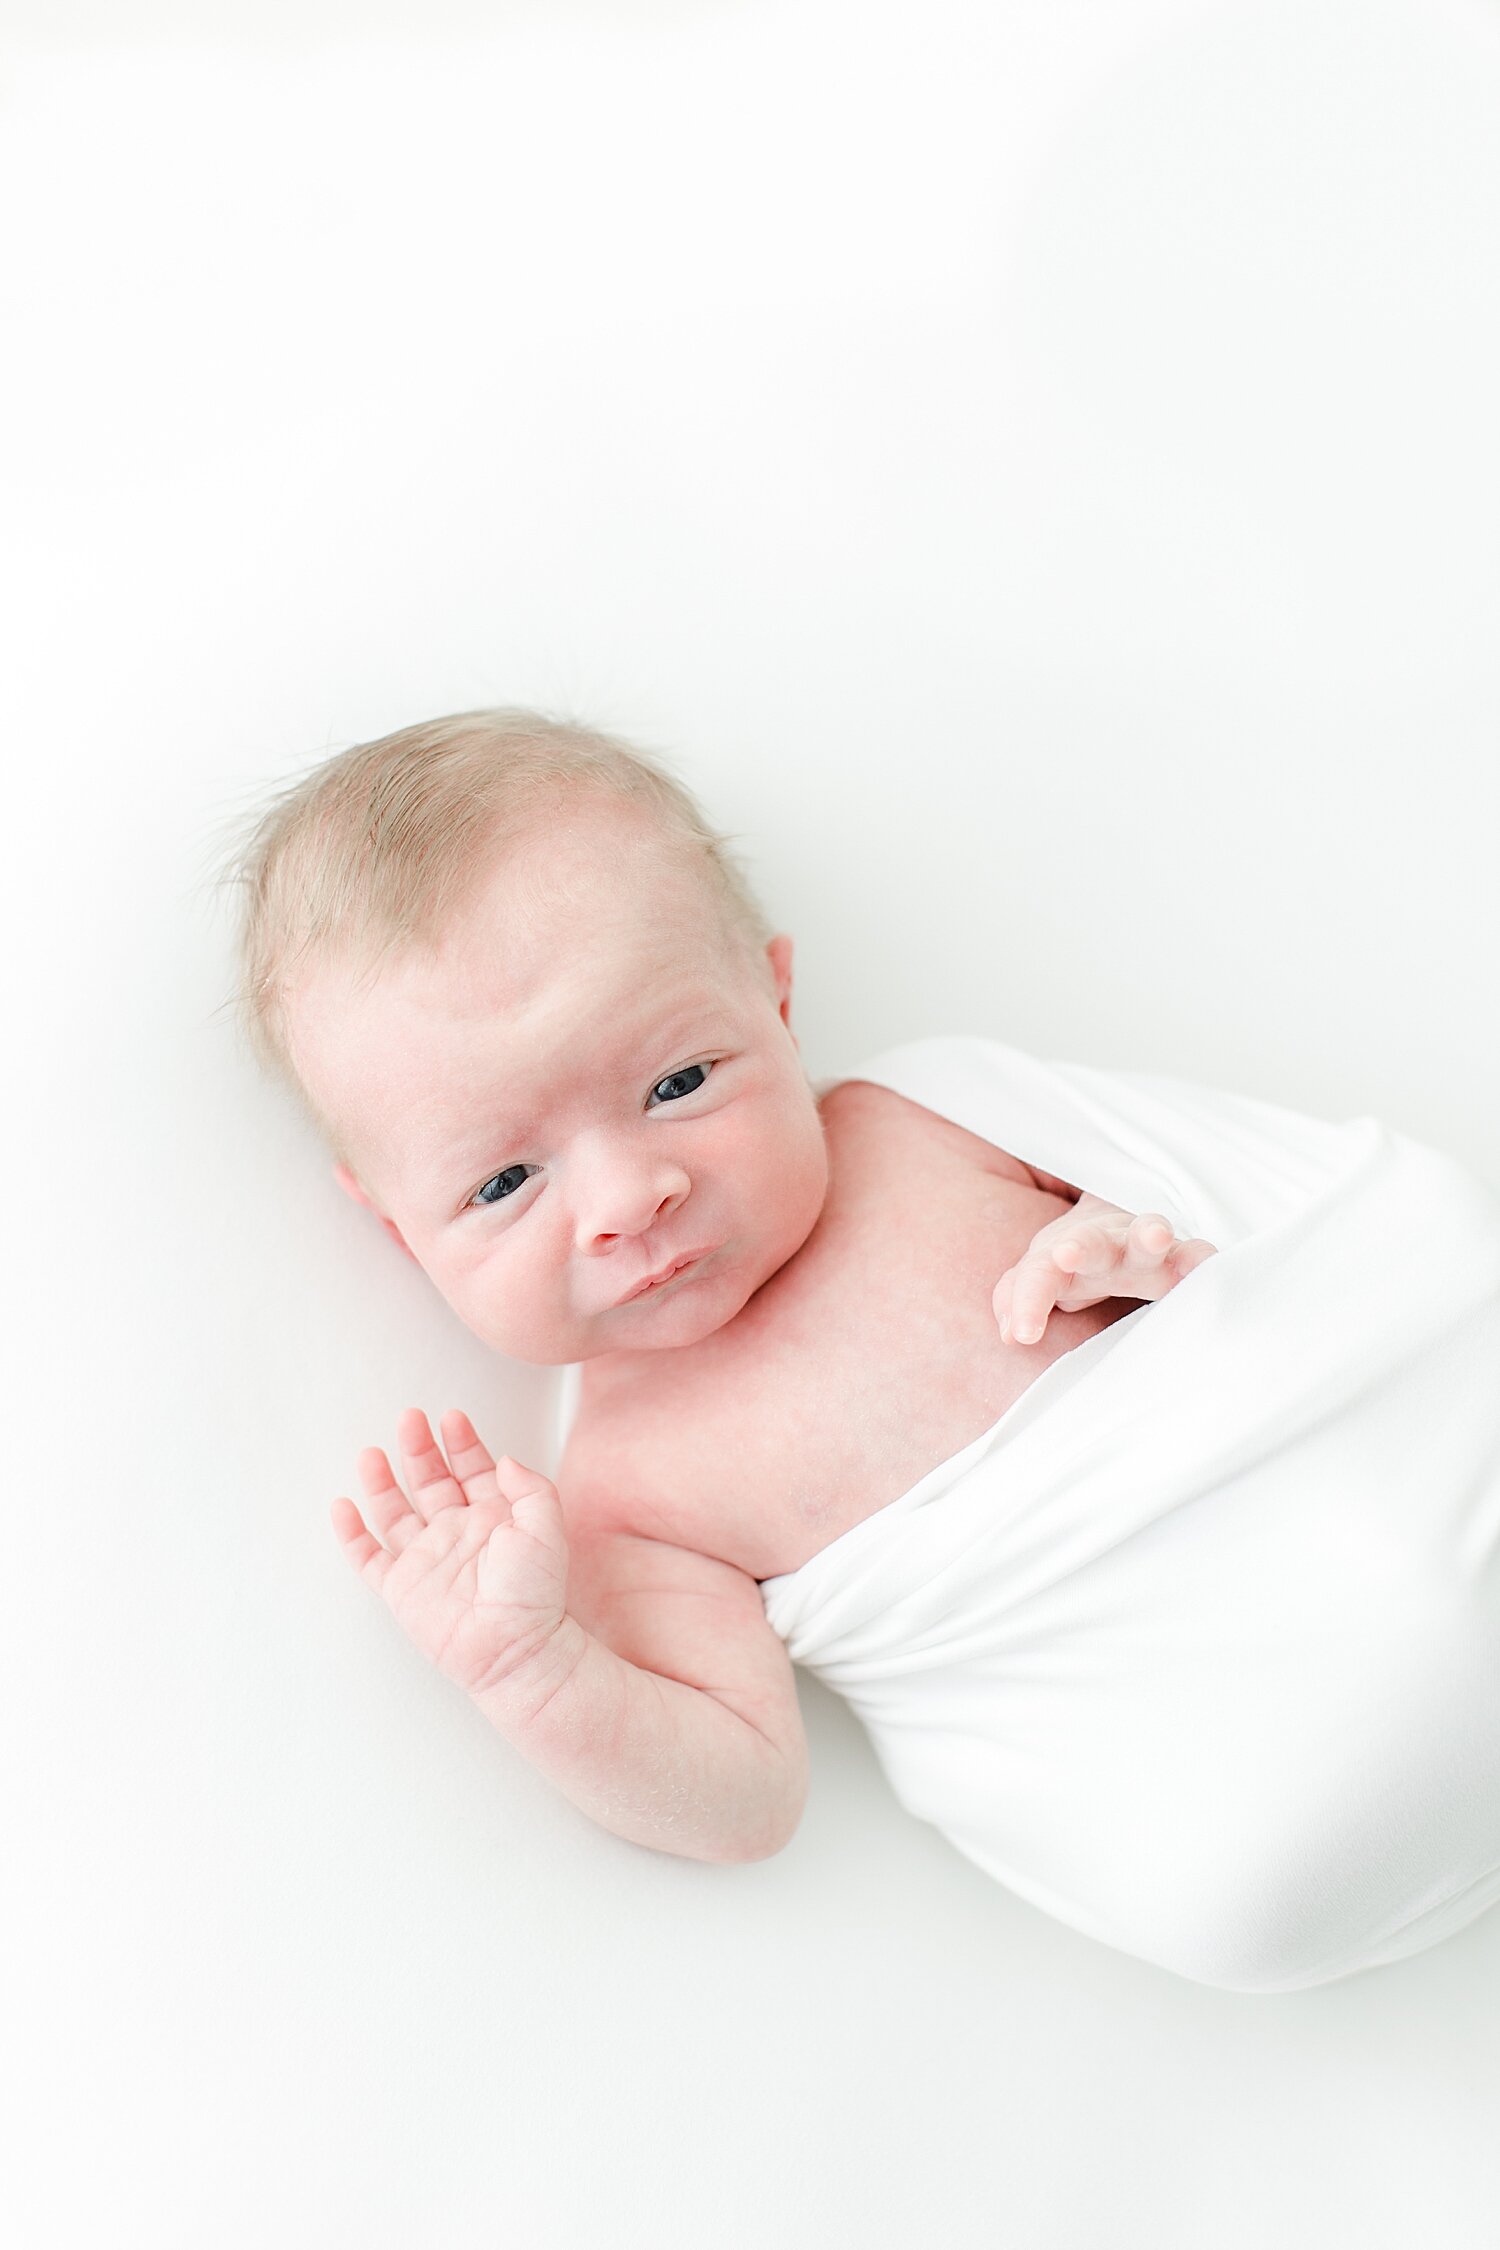 Baby boy swaddled on blanket for newborn photos with Kristin Wood Photography.